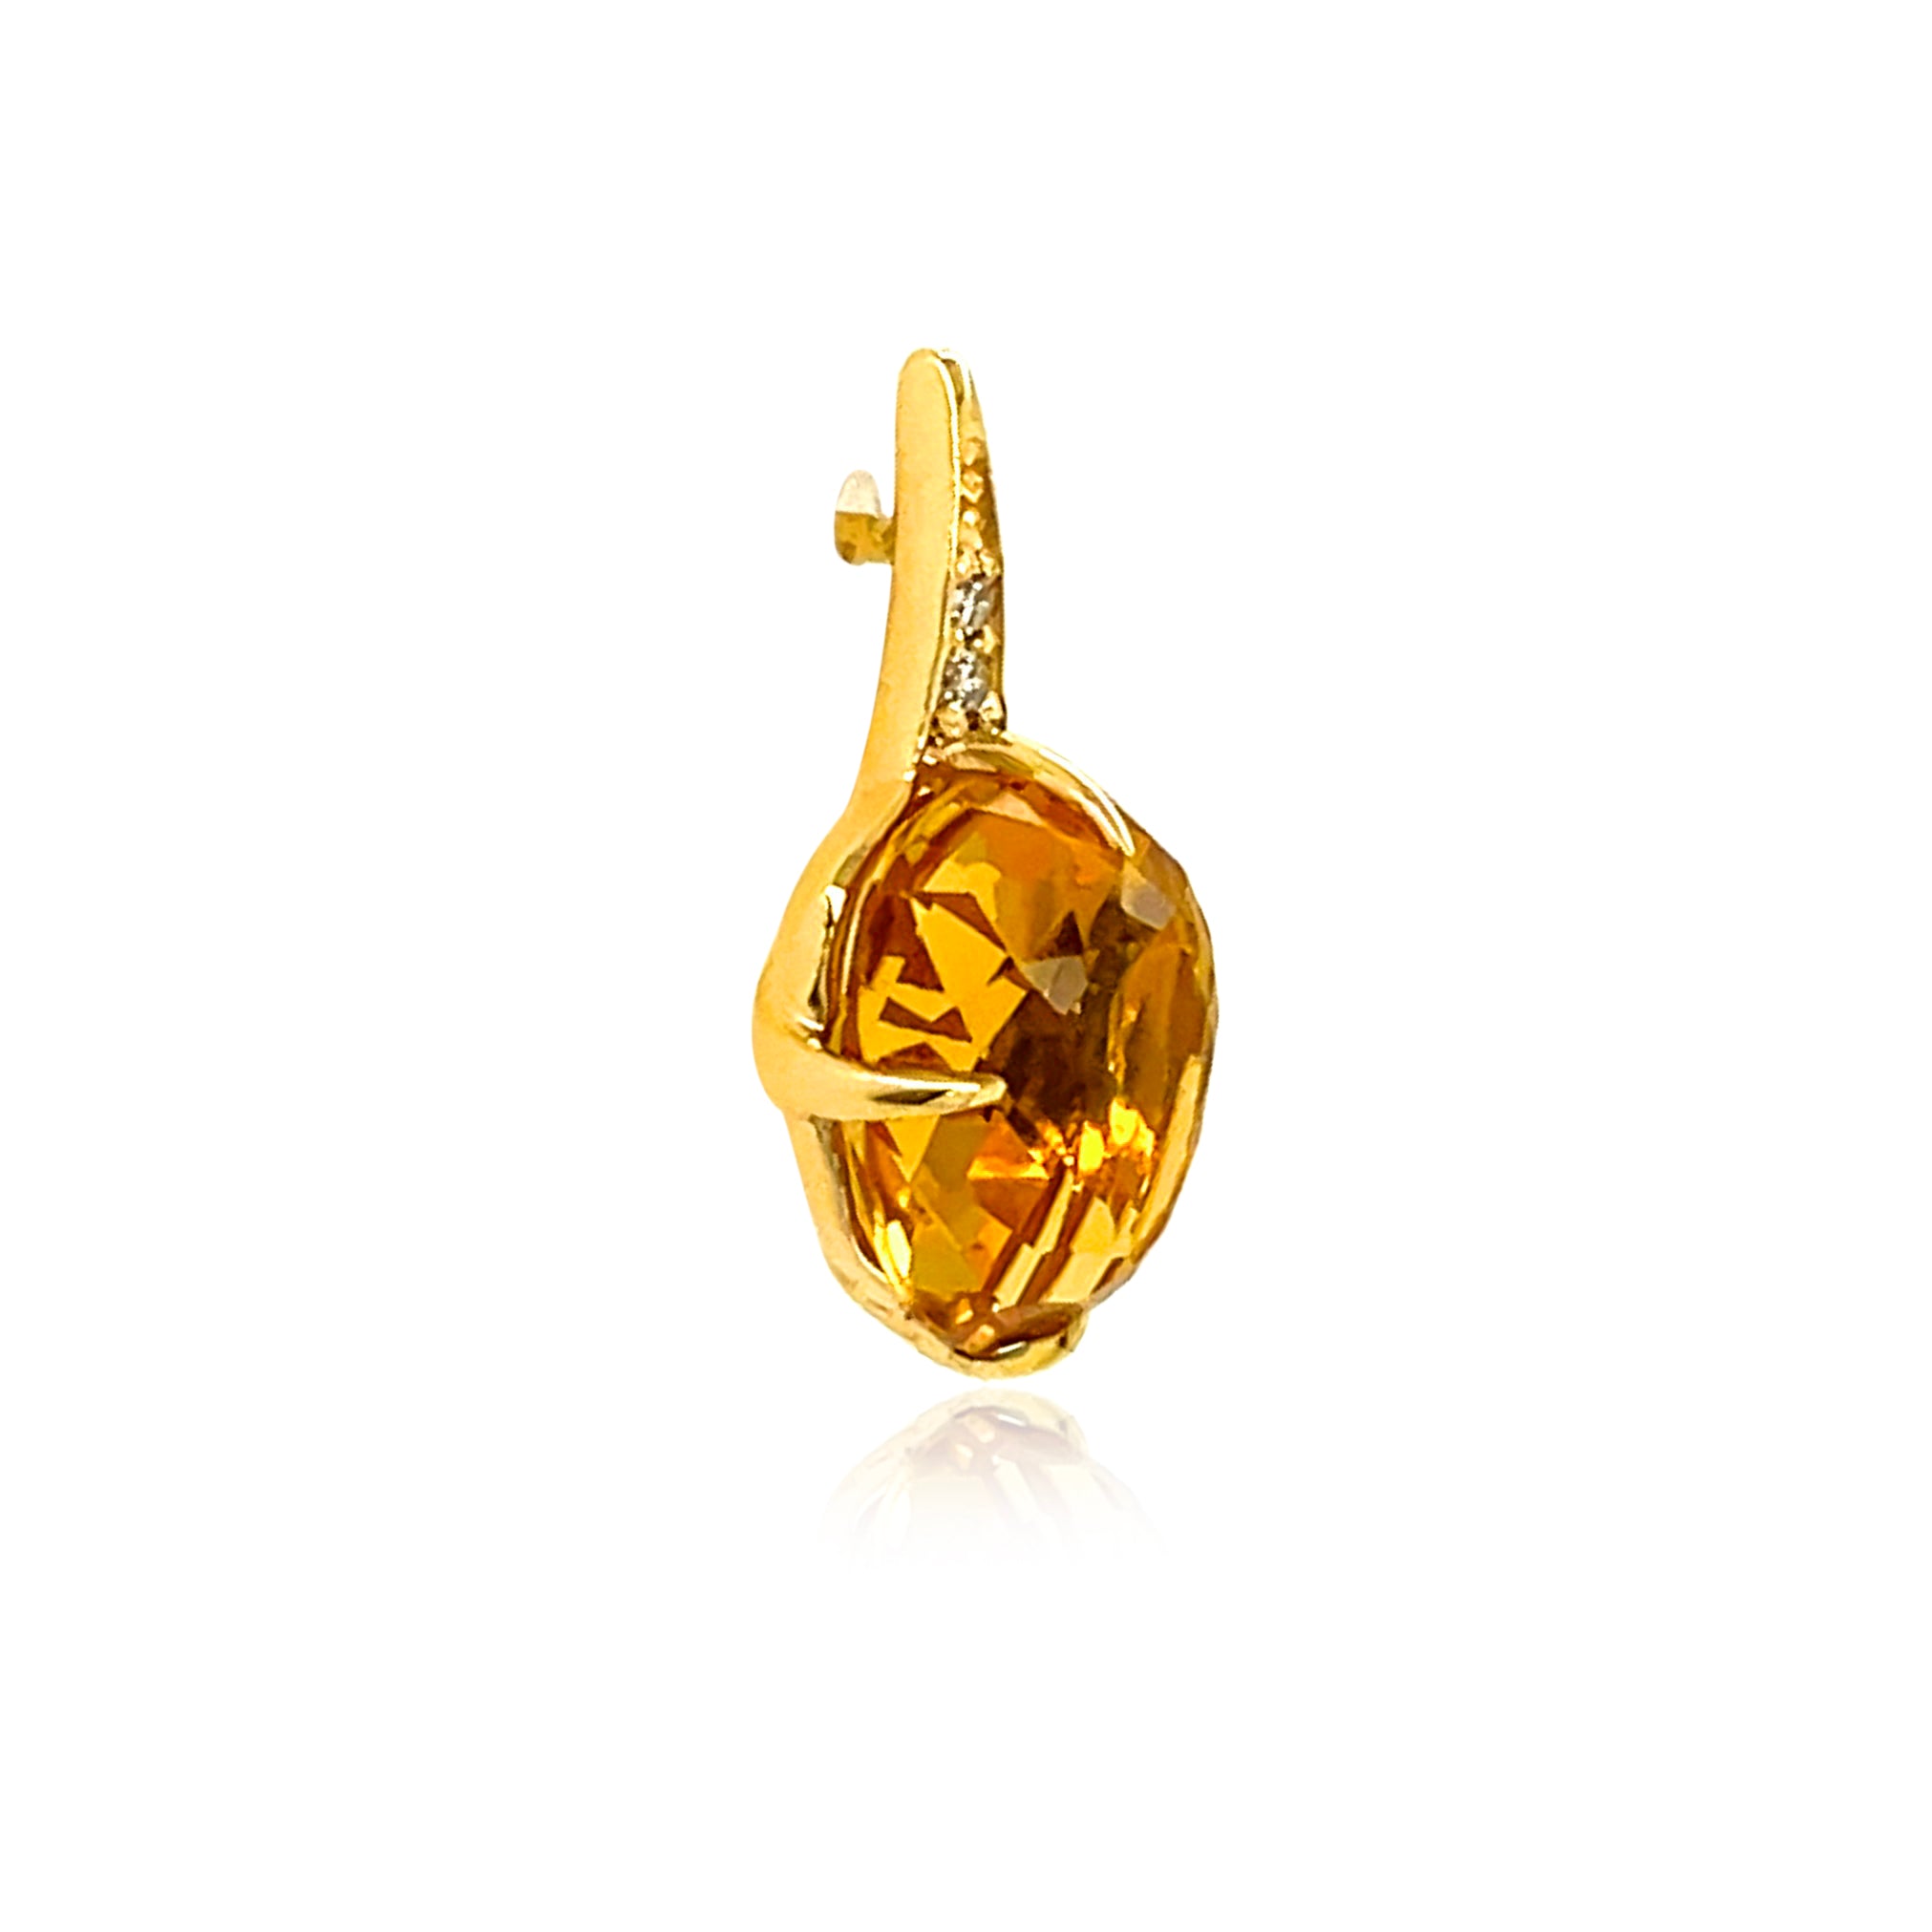 Sugar loaf collection made in Brazil  Tear shape faceted Citrine 6.23 cts  Round small diamonds 0.03 cts  Set in 18k yellow gold  Secure hinged system  18.00 mm.